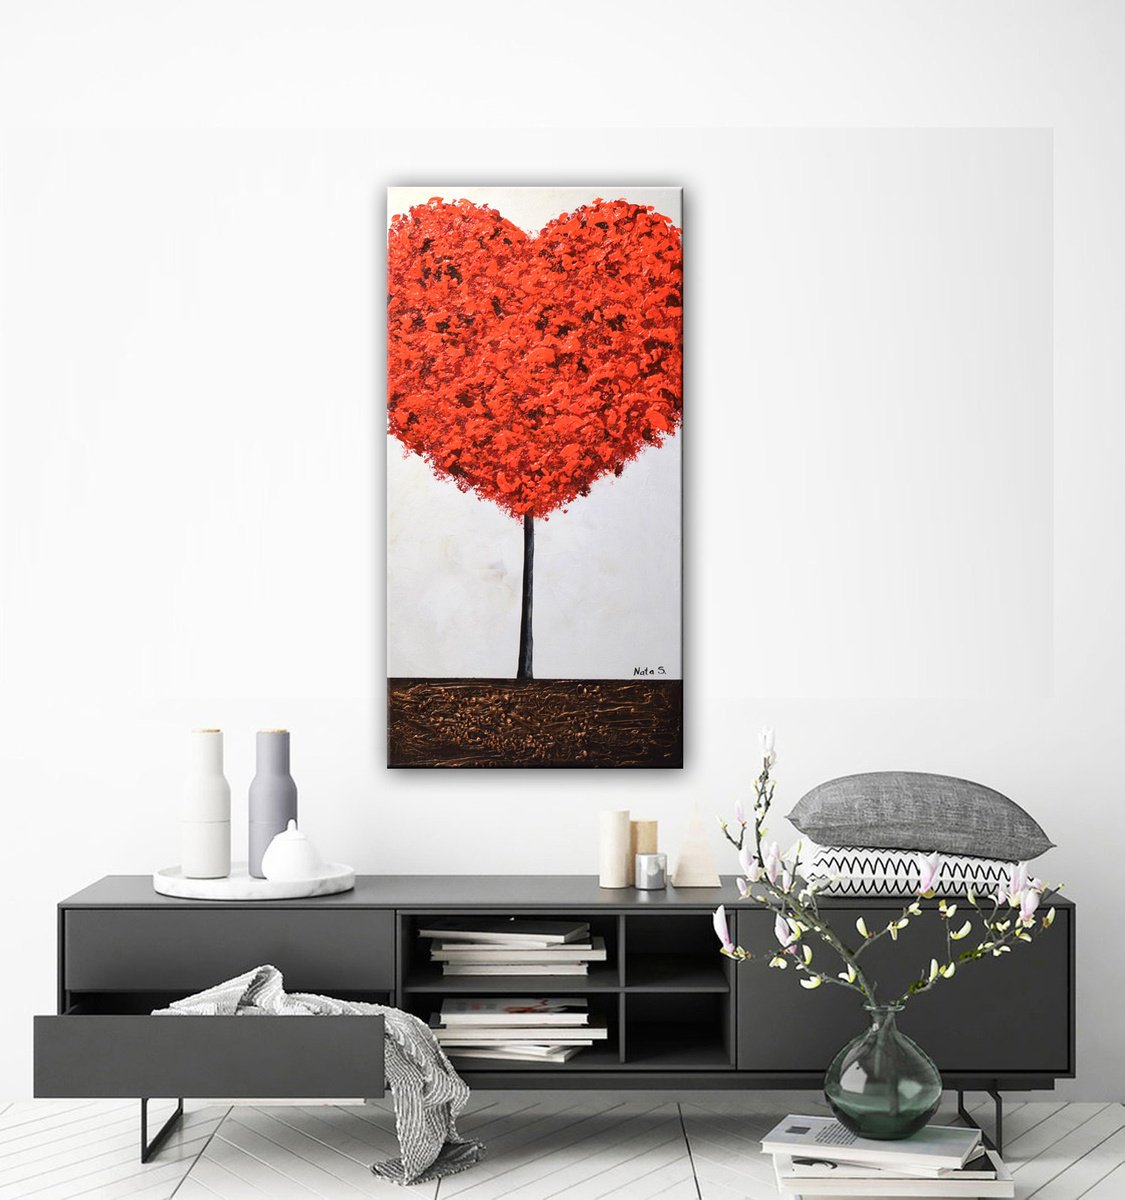 Heart Tree - Abstract Textured Red Tree Painting by Nataliya Stupak